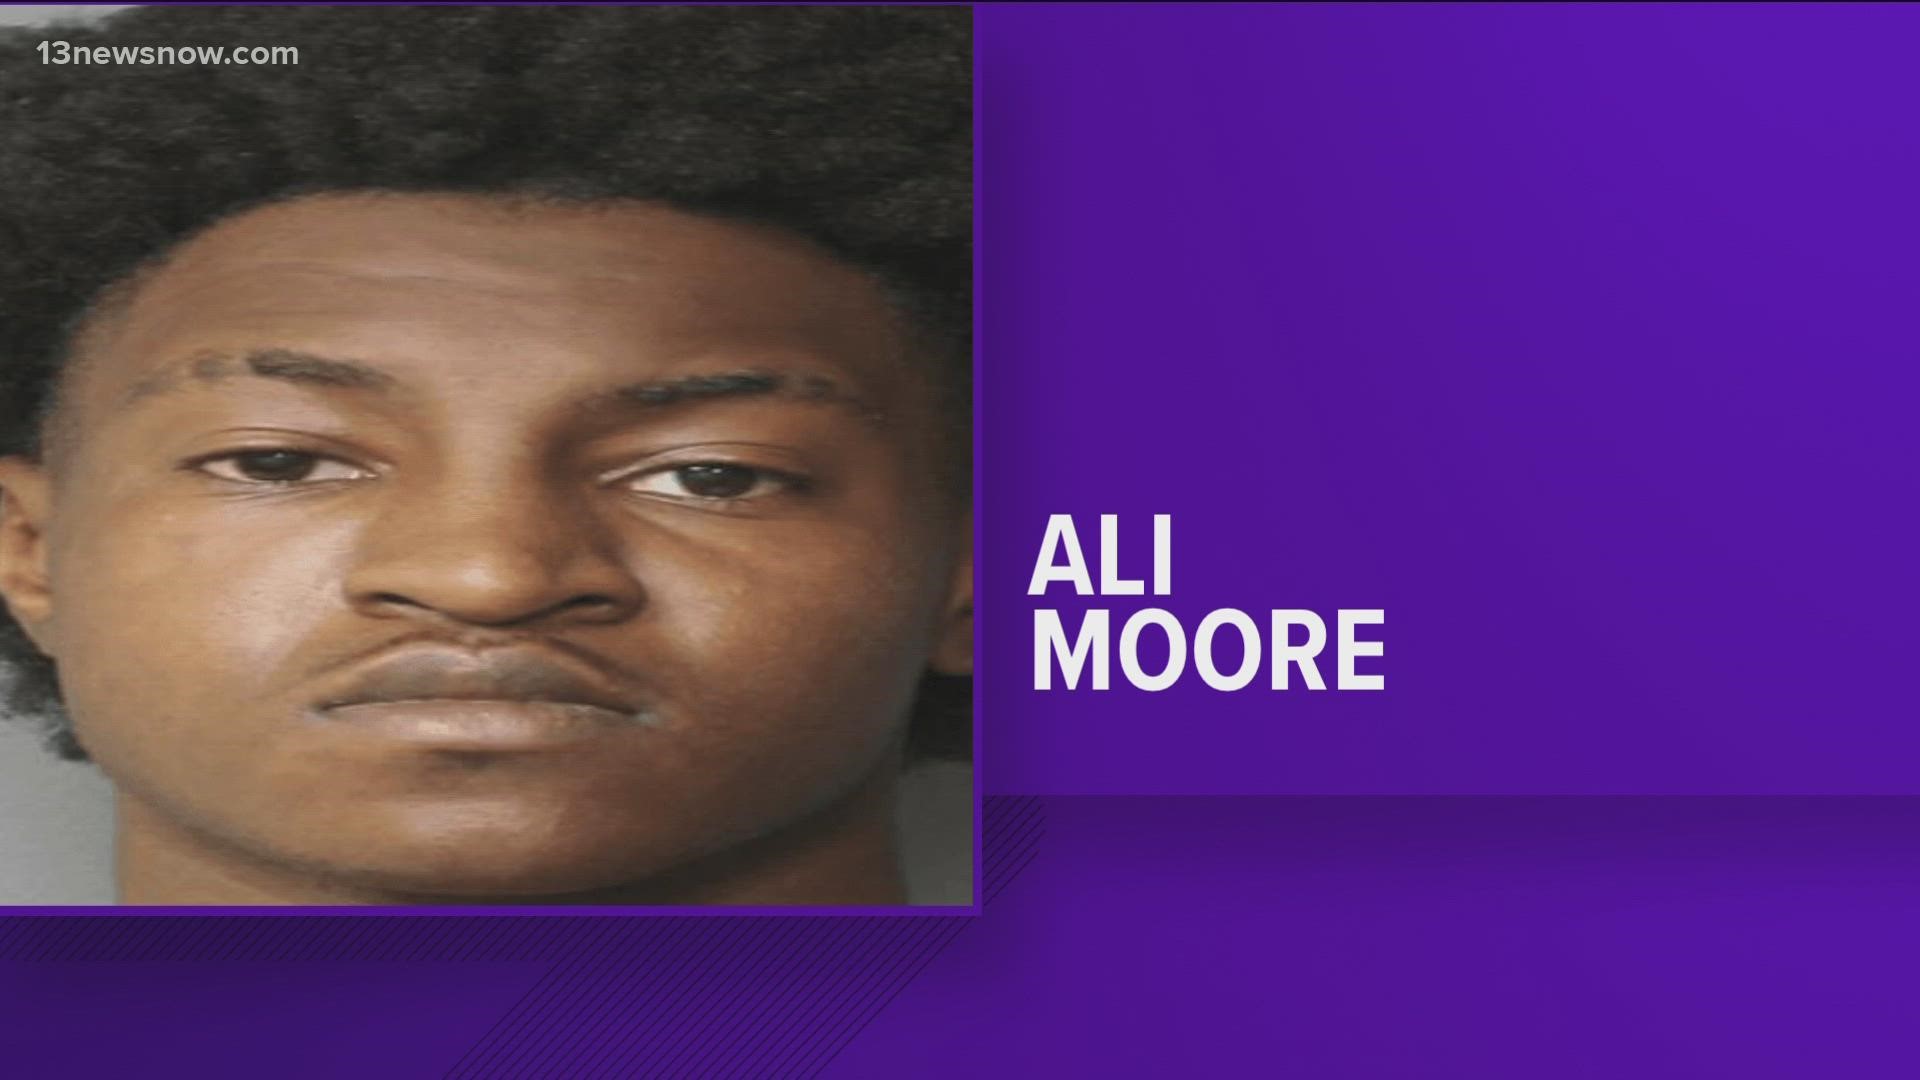 Ali A. Moore, 20, was taken into custody and is being held without bond at Norfolk City Jail.